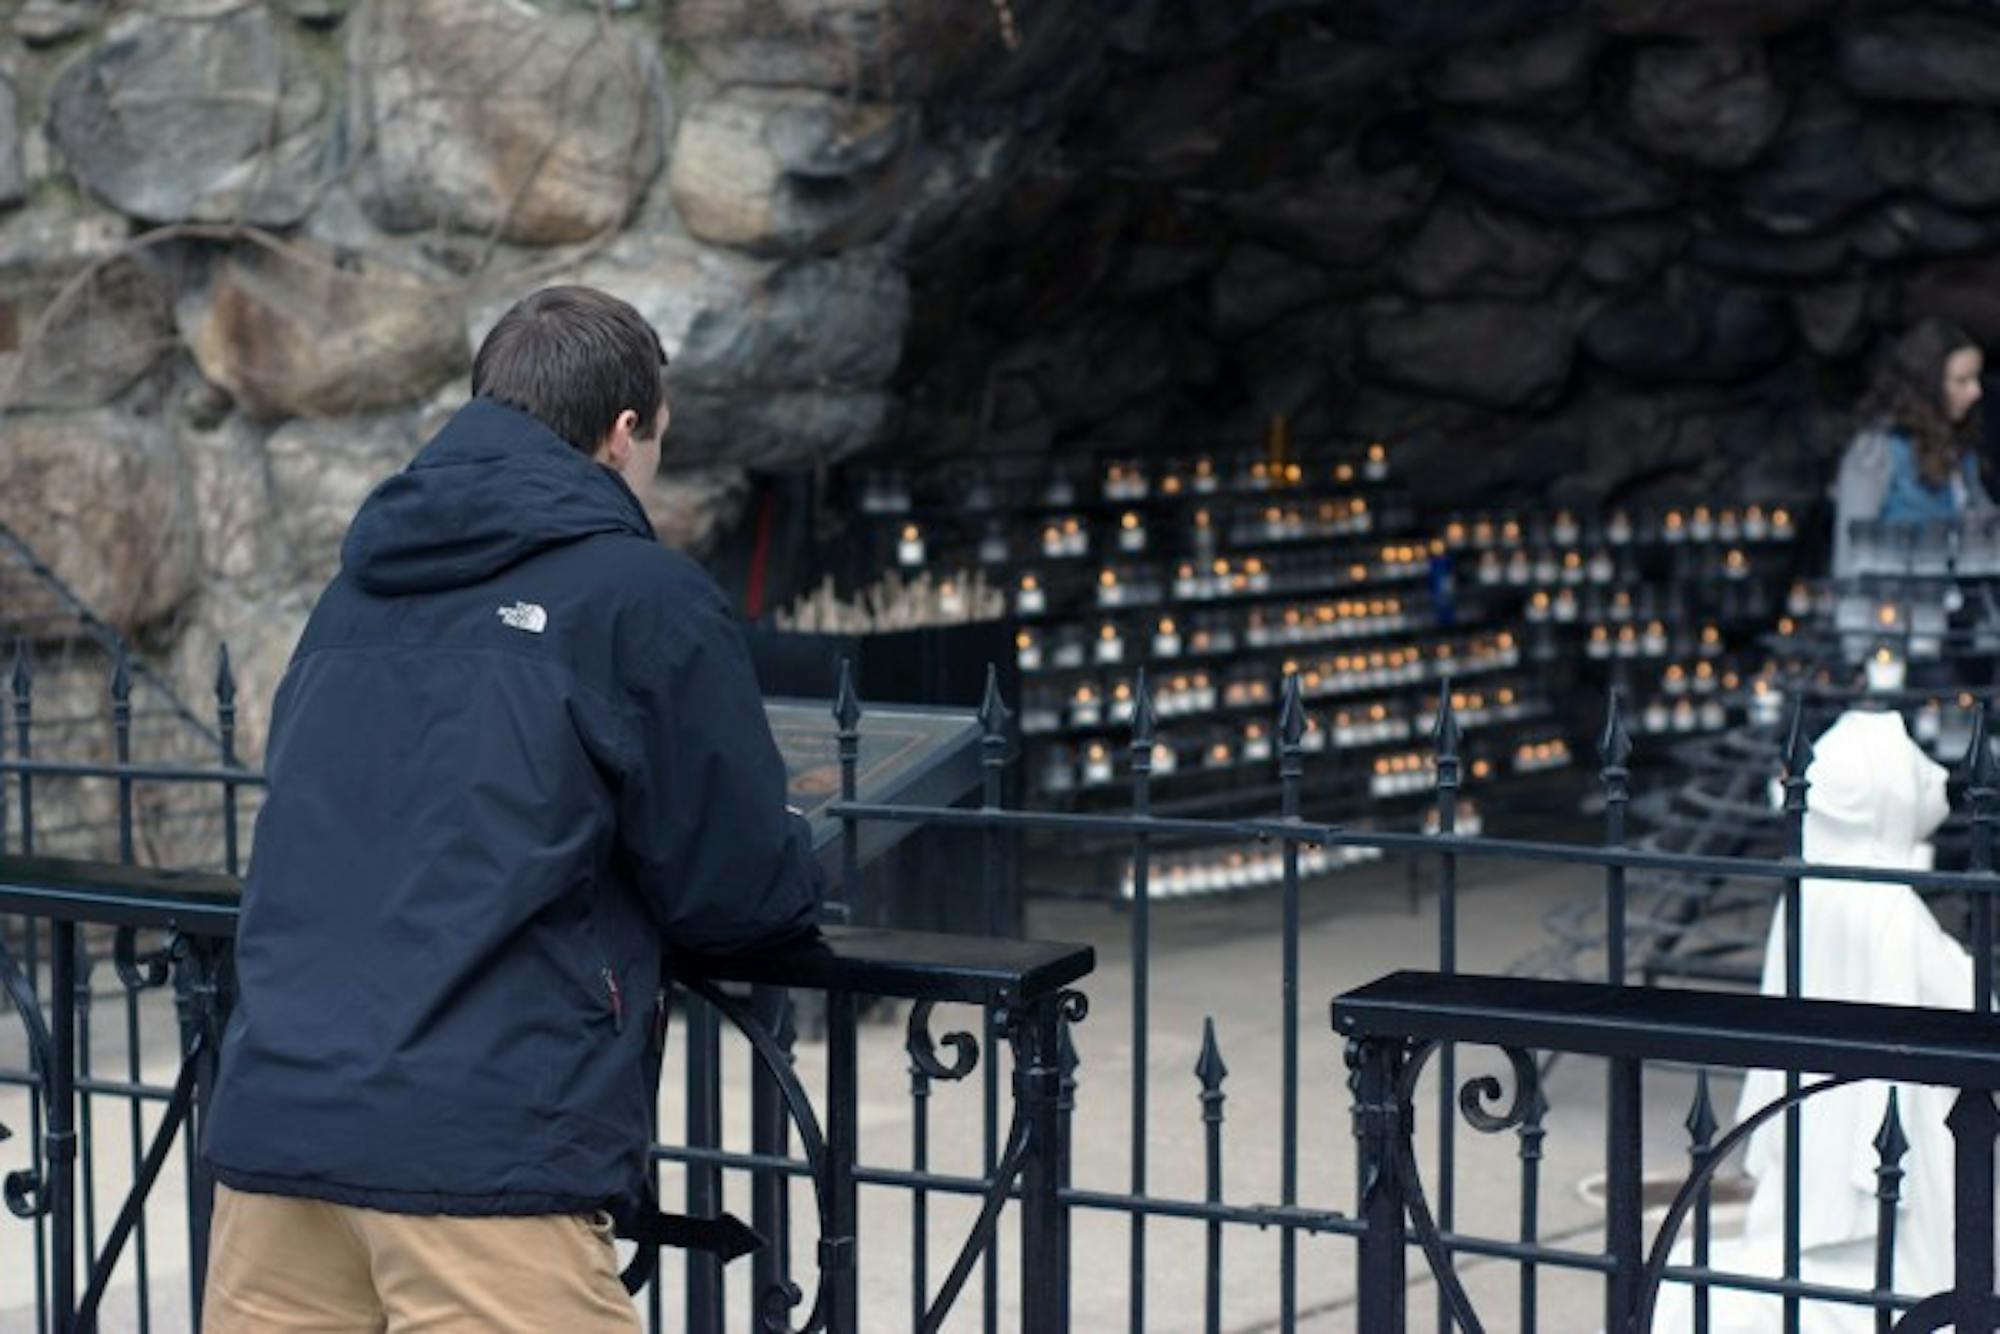 In response to an off-campus sexual assault on Feb. 24, student government held a prayer service at the Grotto on Friday, encouraging students to promote awareness and discussion about sexual assault.